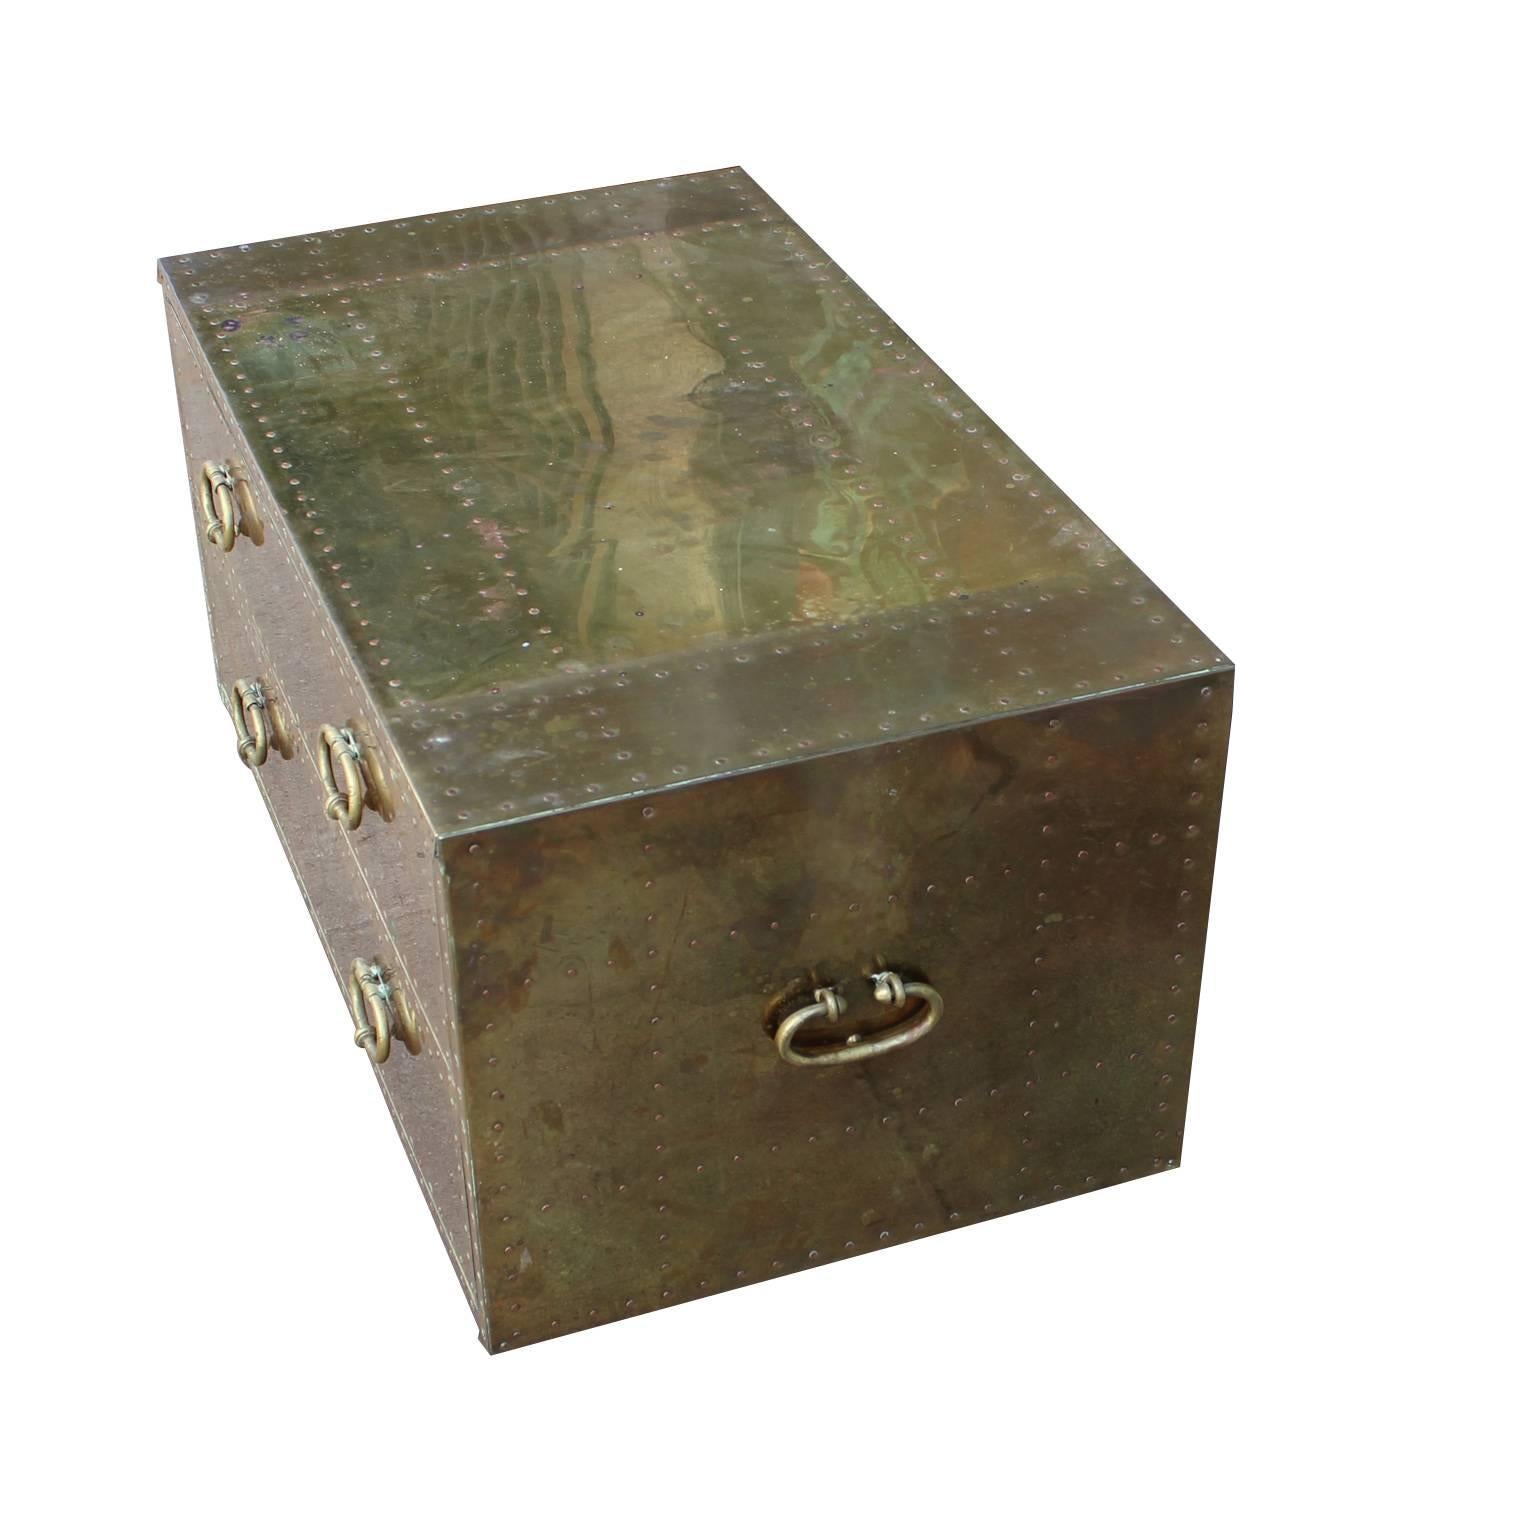 Sarreid Hollywood Regency Campaign chest in nice vintage condition with the right amount of patina and wear.